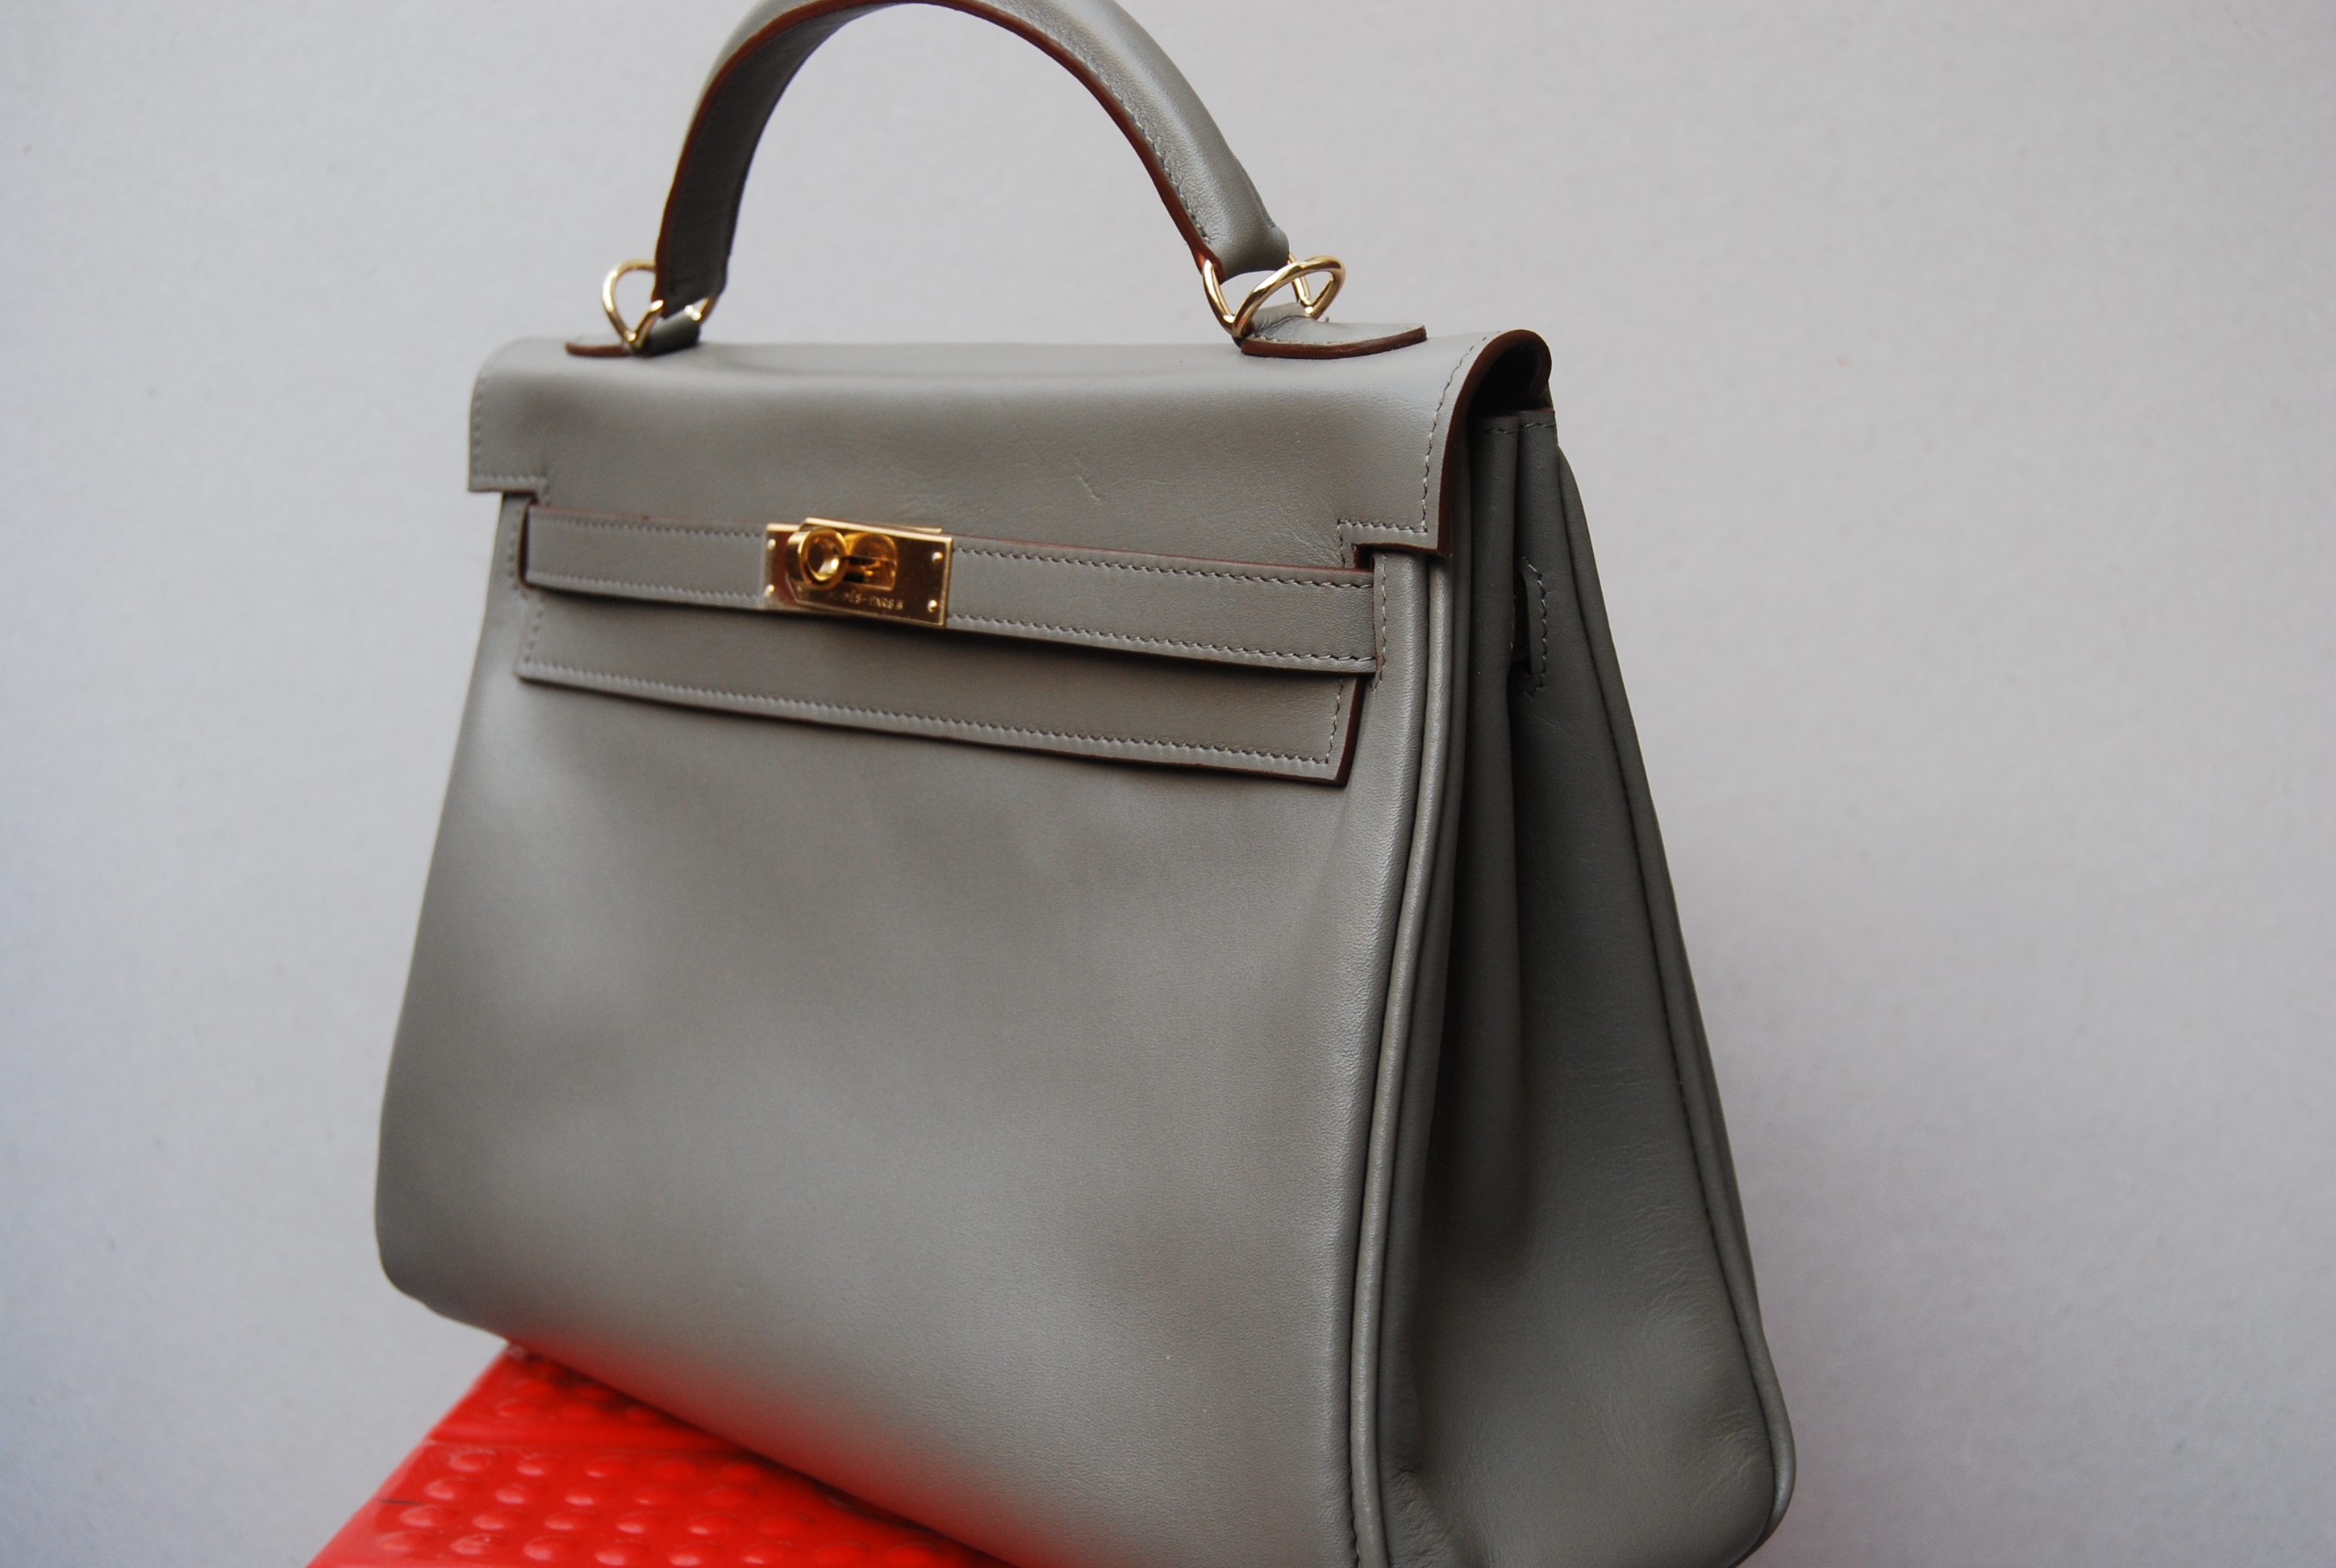 hermesbirkinhandbag123 | 4 out of 5 dentists recommend this ...  